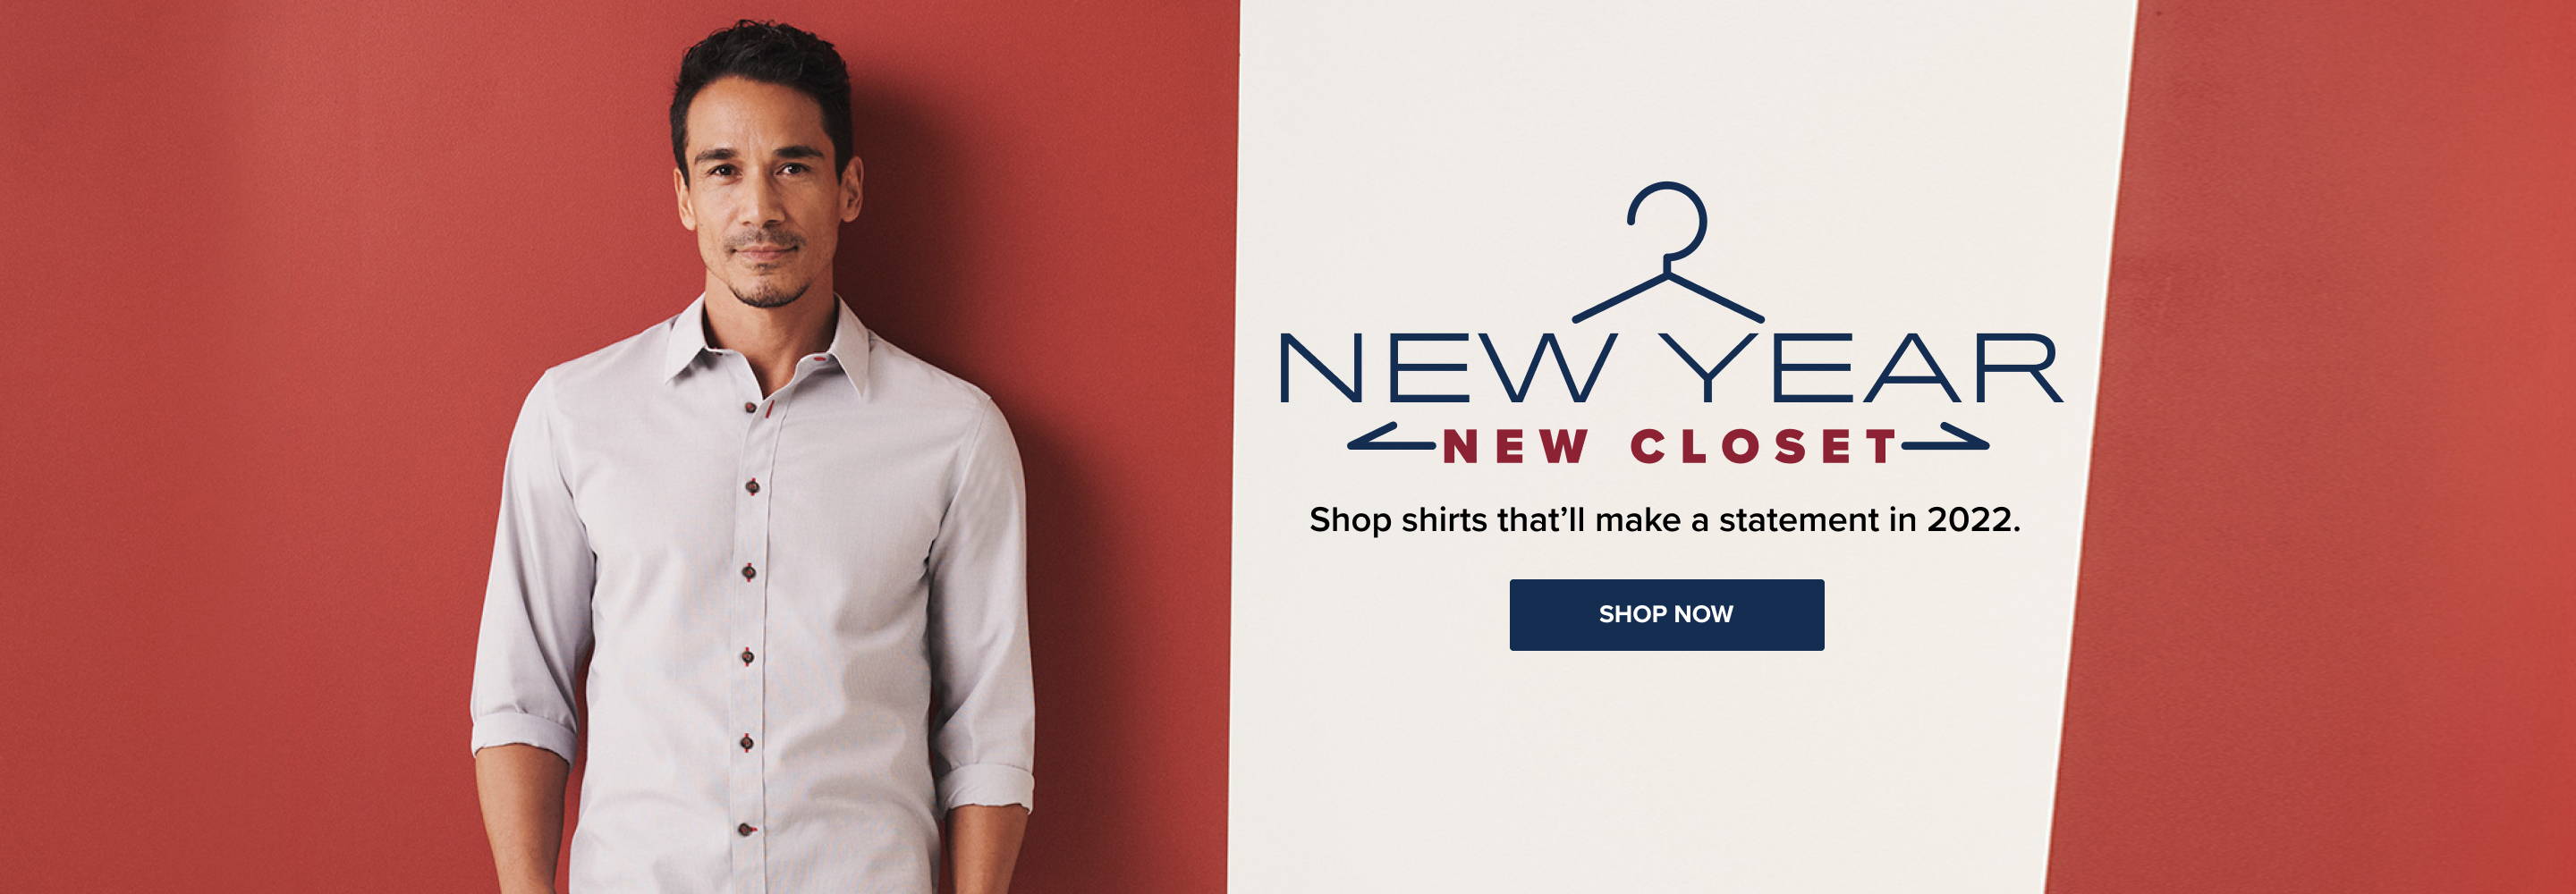 New year new closet. Shop shirts that'll make a statement in 2022